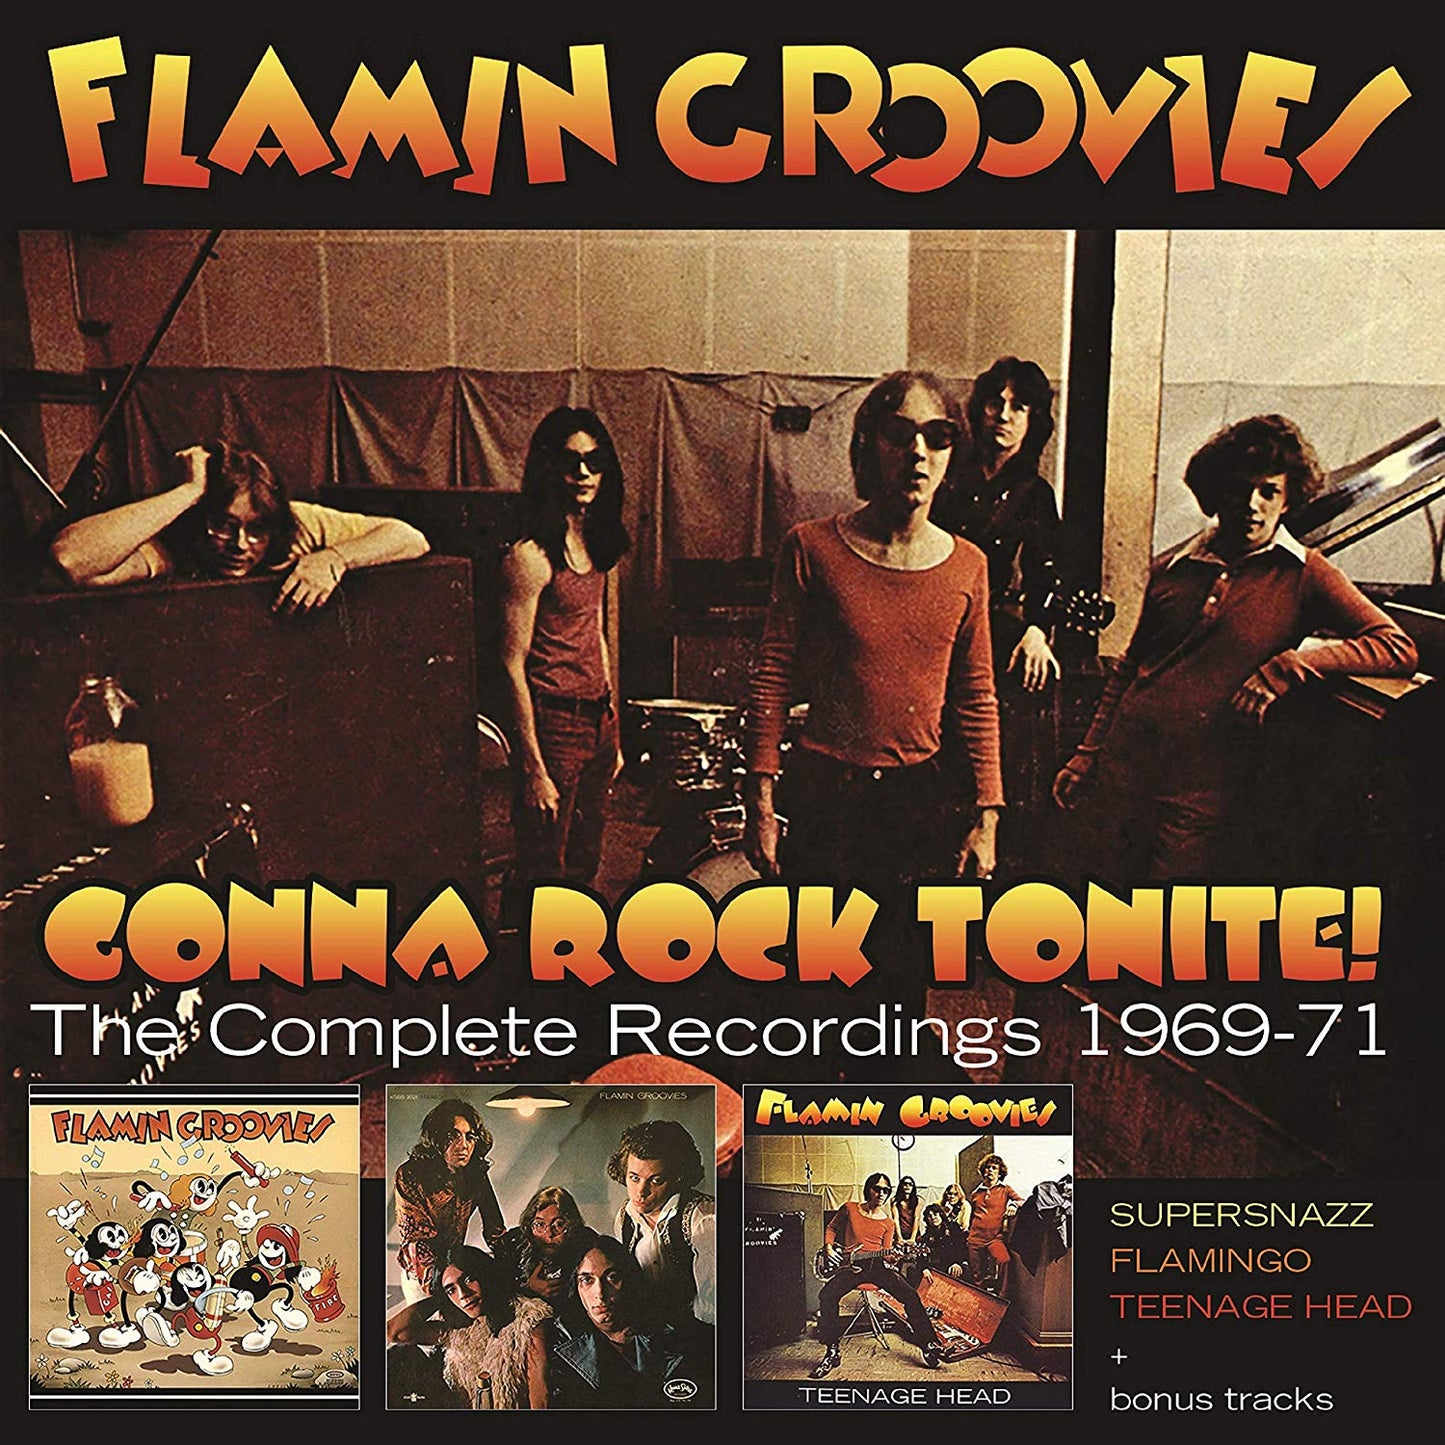 Flamin' Groovies - Gonna Rock Tonite! - The Complete Recordings 1969-71 - 3CD